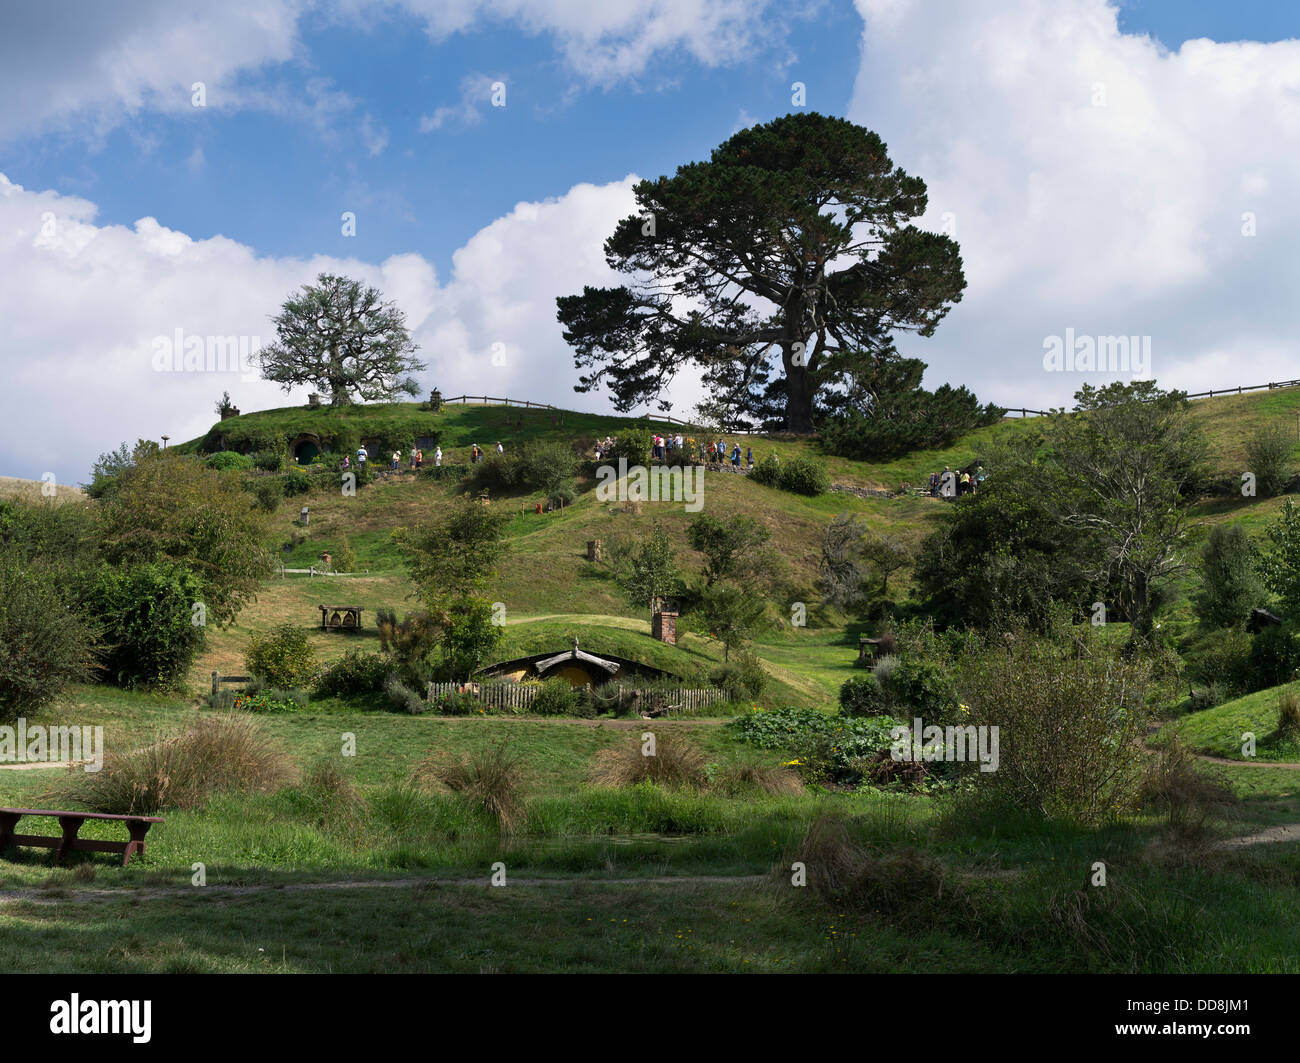 dh Lord of the Rings village HOBBITON NEW ZEALAND Hobbits tours film set movie site films people tourism hobbit tour middle earth shire tourist Stock Photo